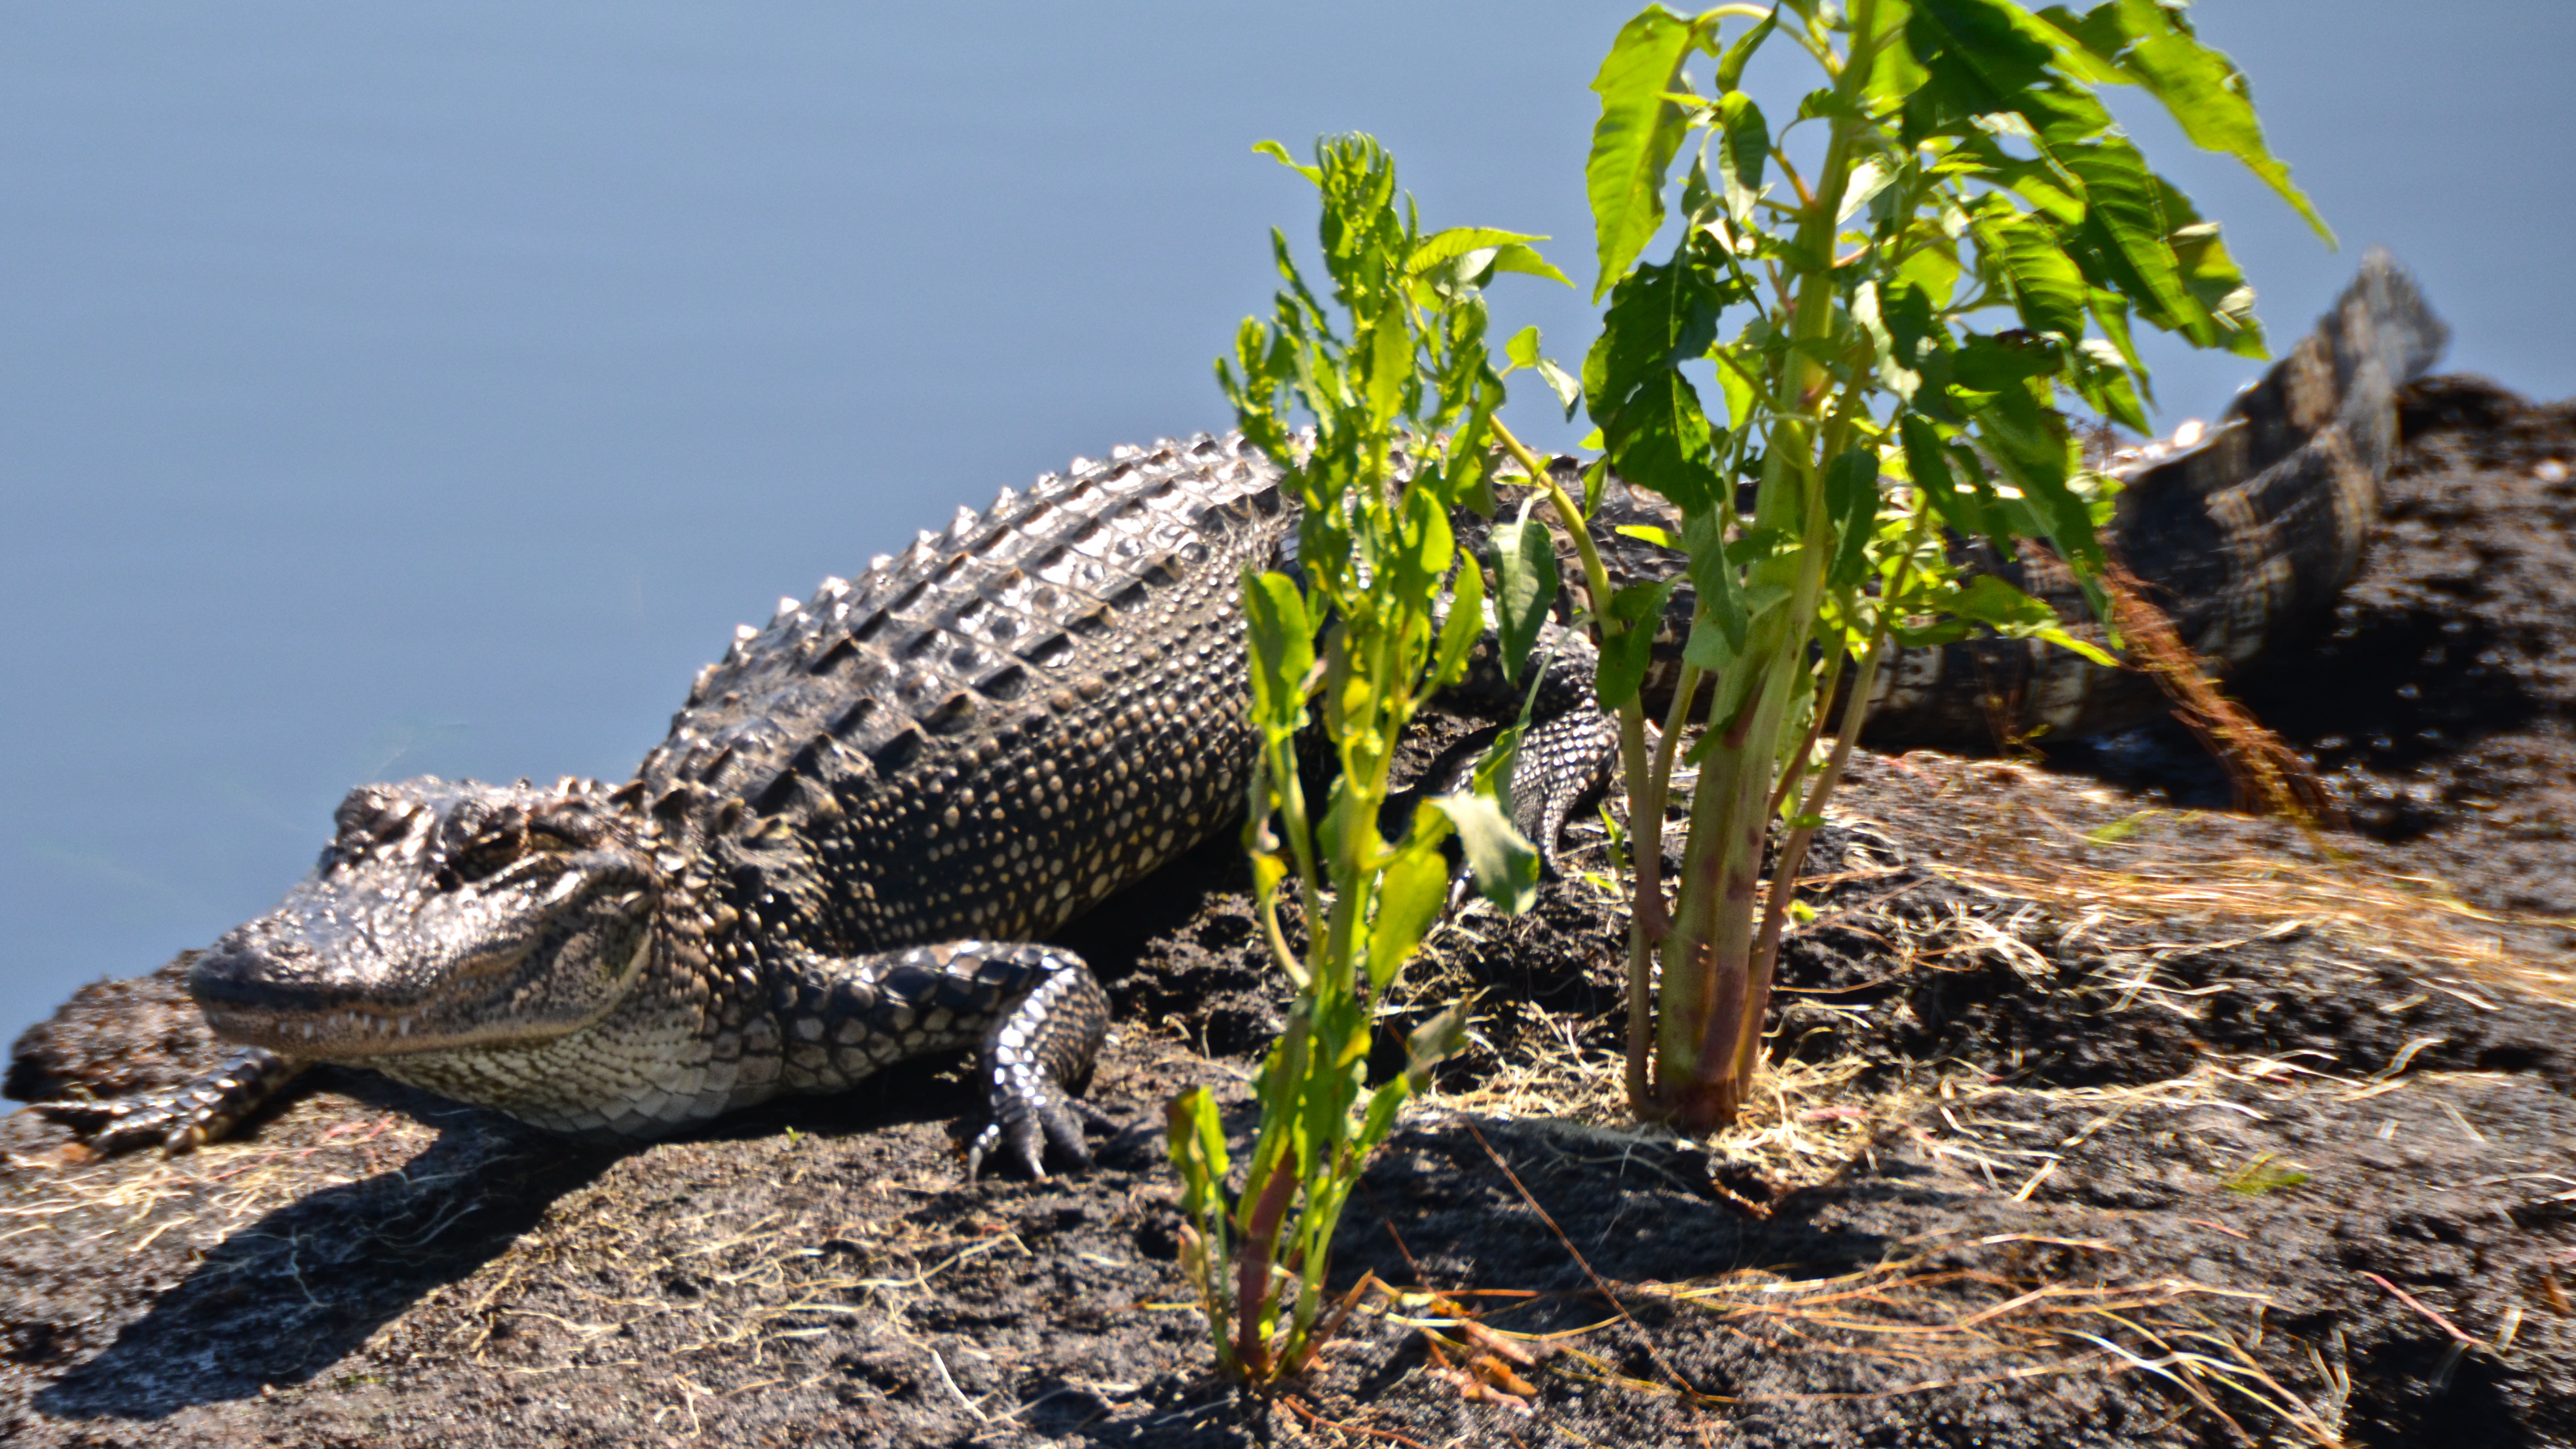 An alligator rests in the river bank